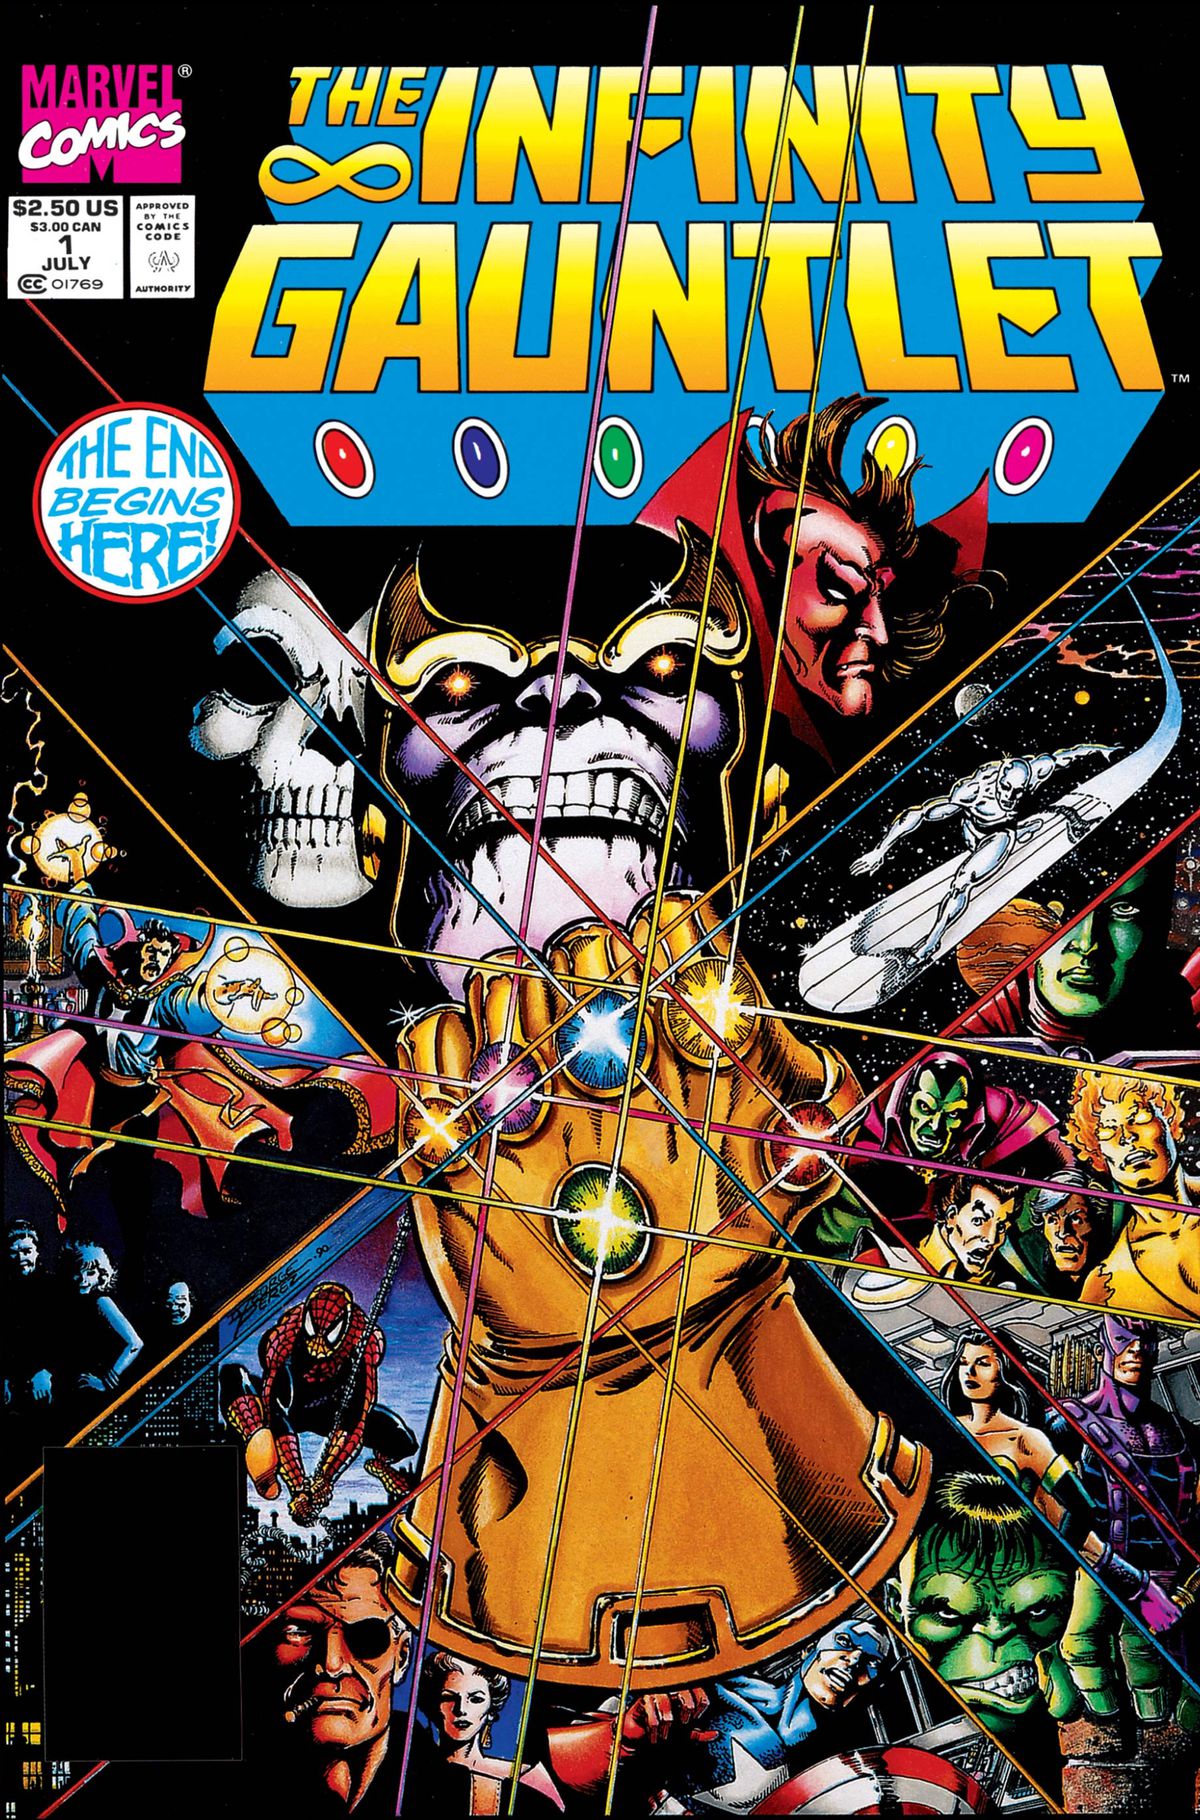 The cover of Infinity Gauntlet #1, Marvel Comics (1991)